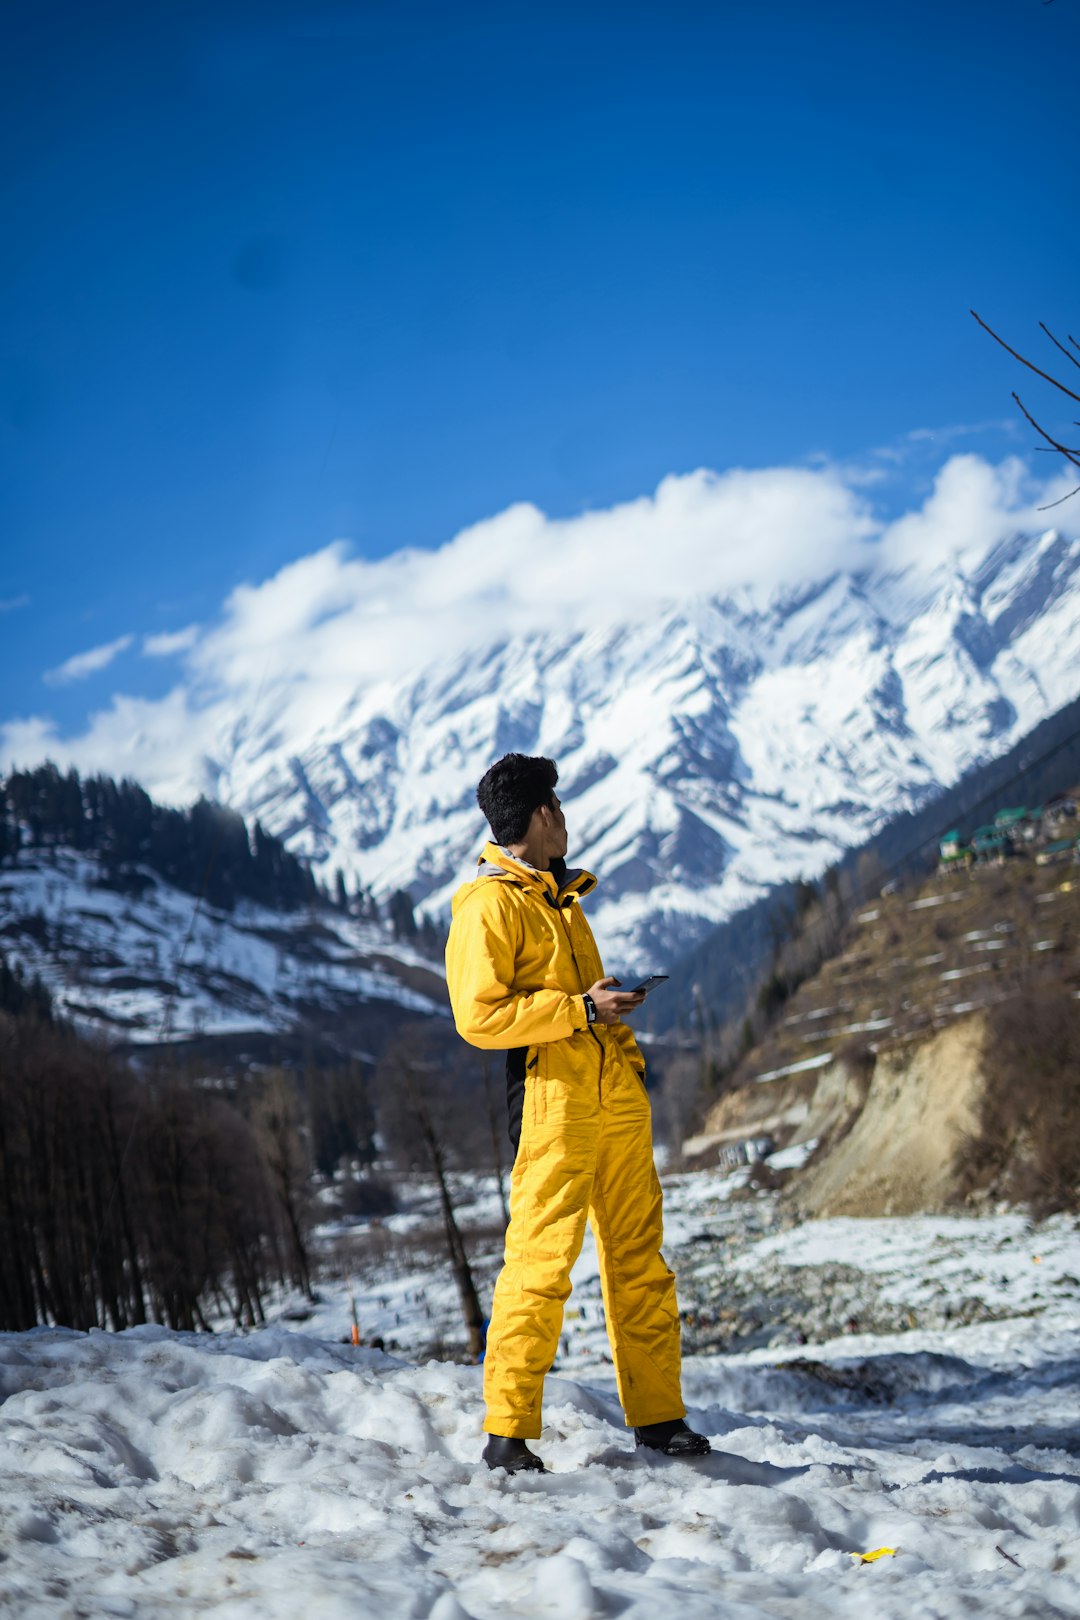 travelers stories about Mountain range in Manali, India